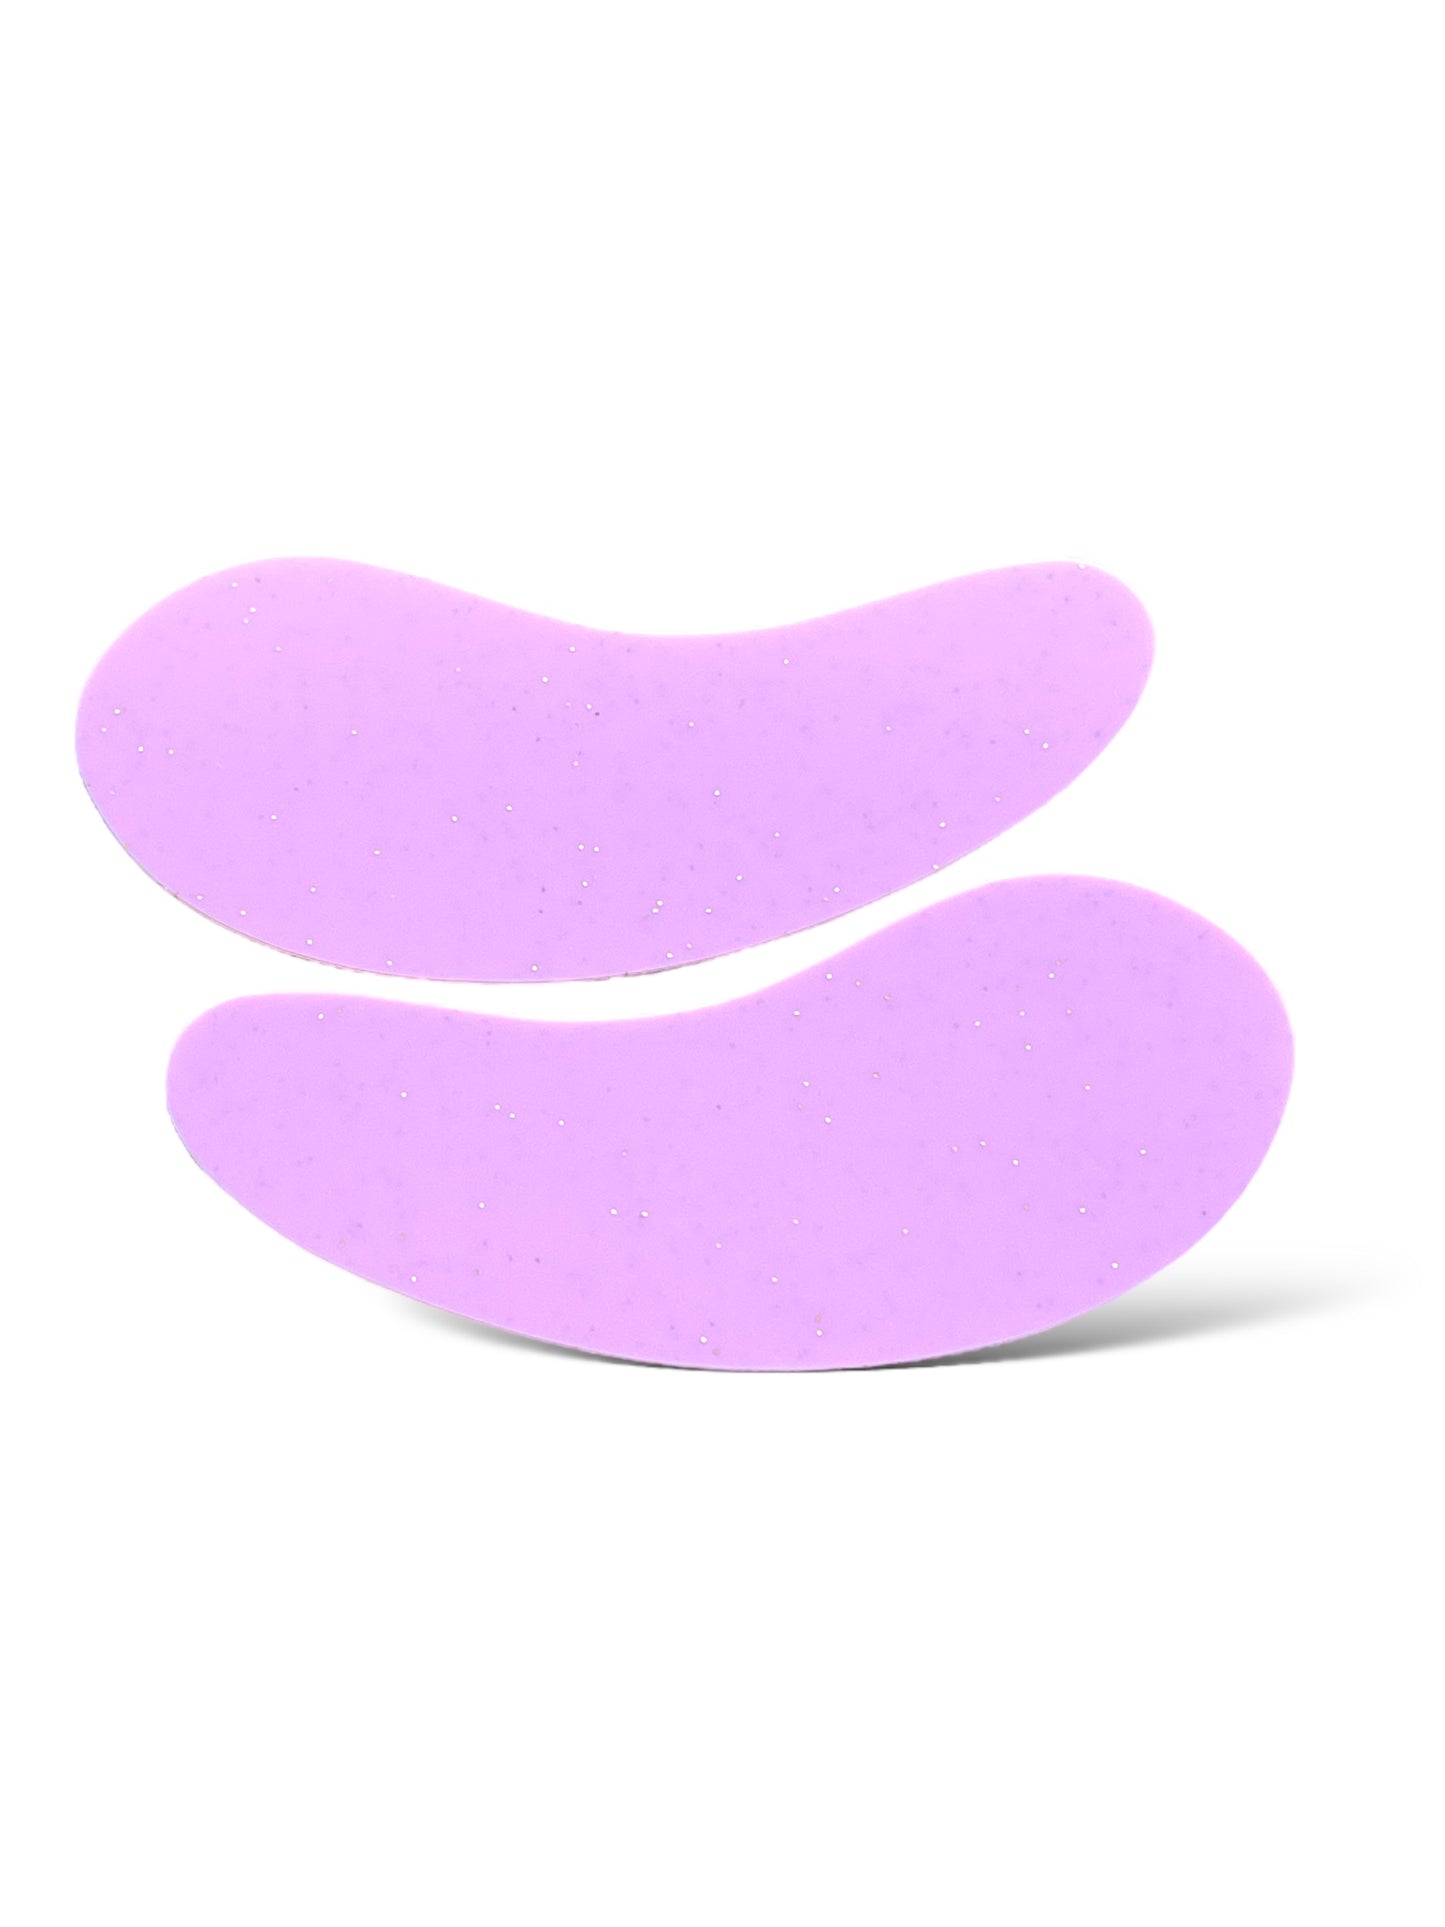 Silicone Reusable Pads